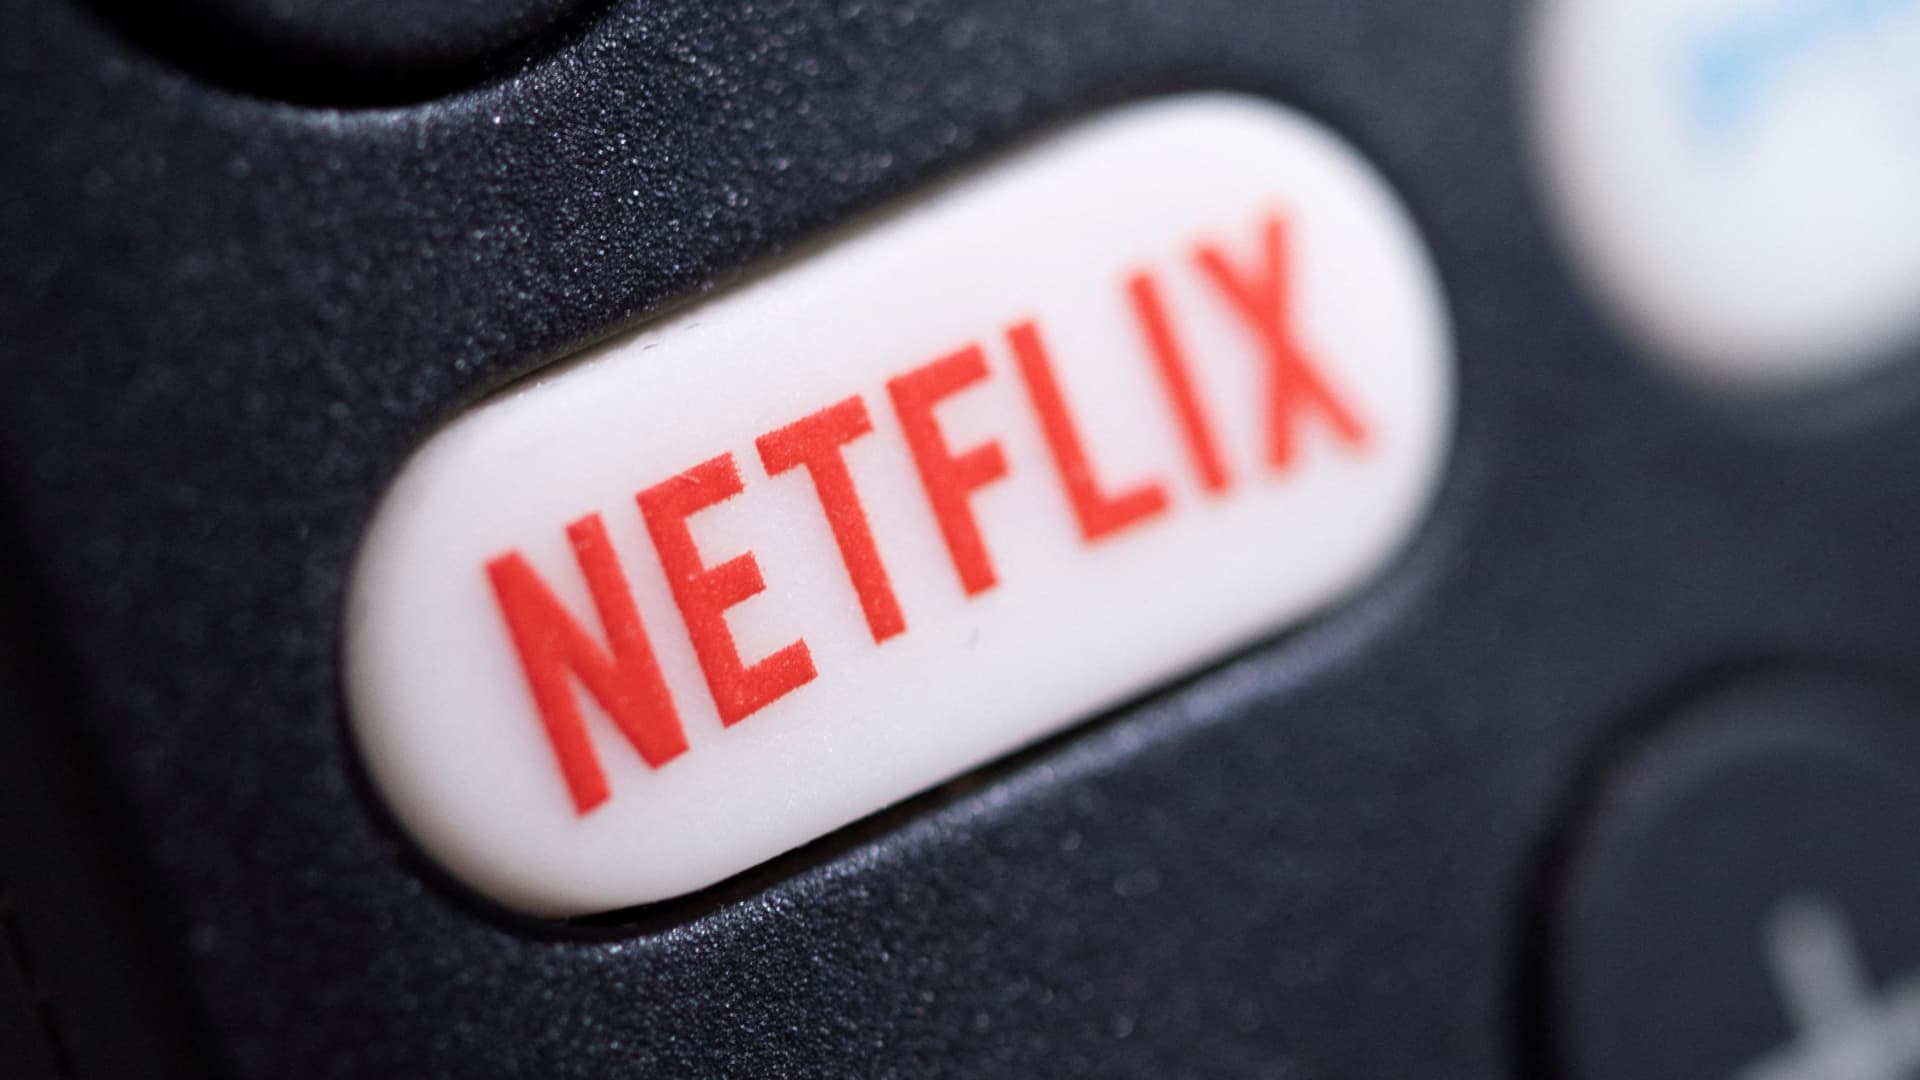 Netflix will charge $6.99 a month for new ad-supported tier starting Nov. 3 in U..